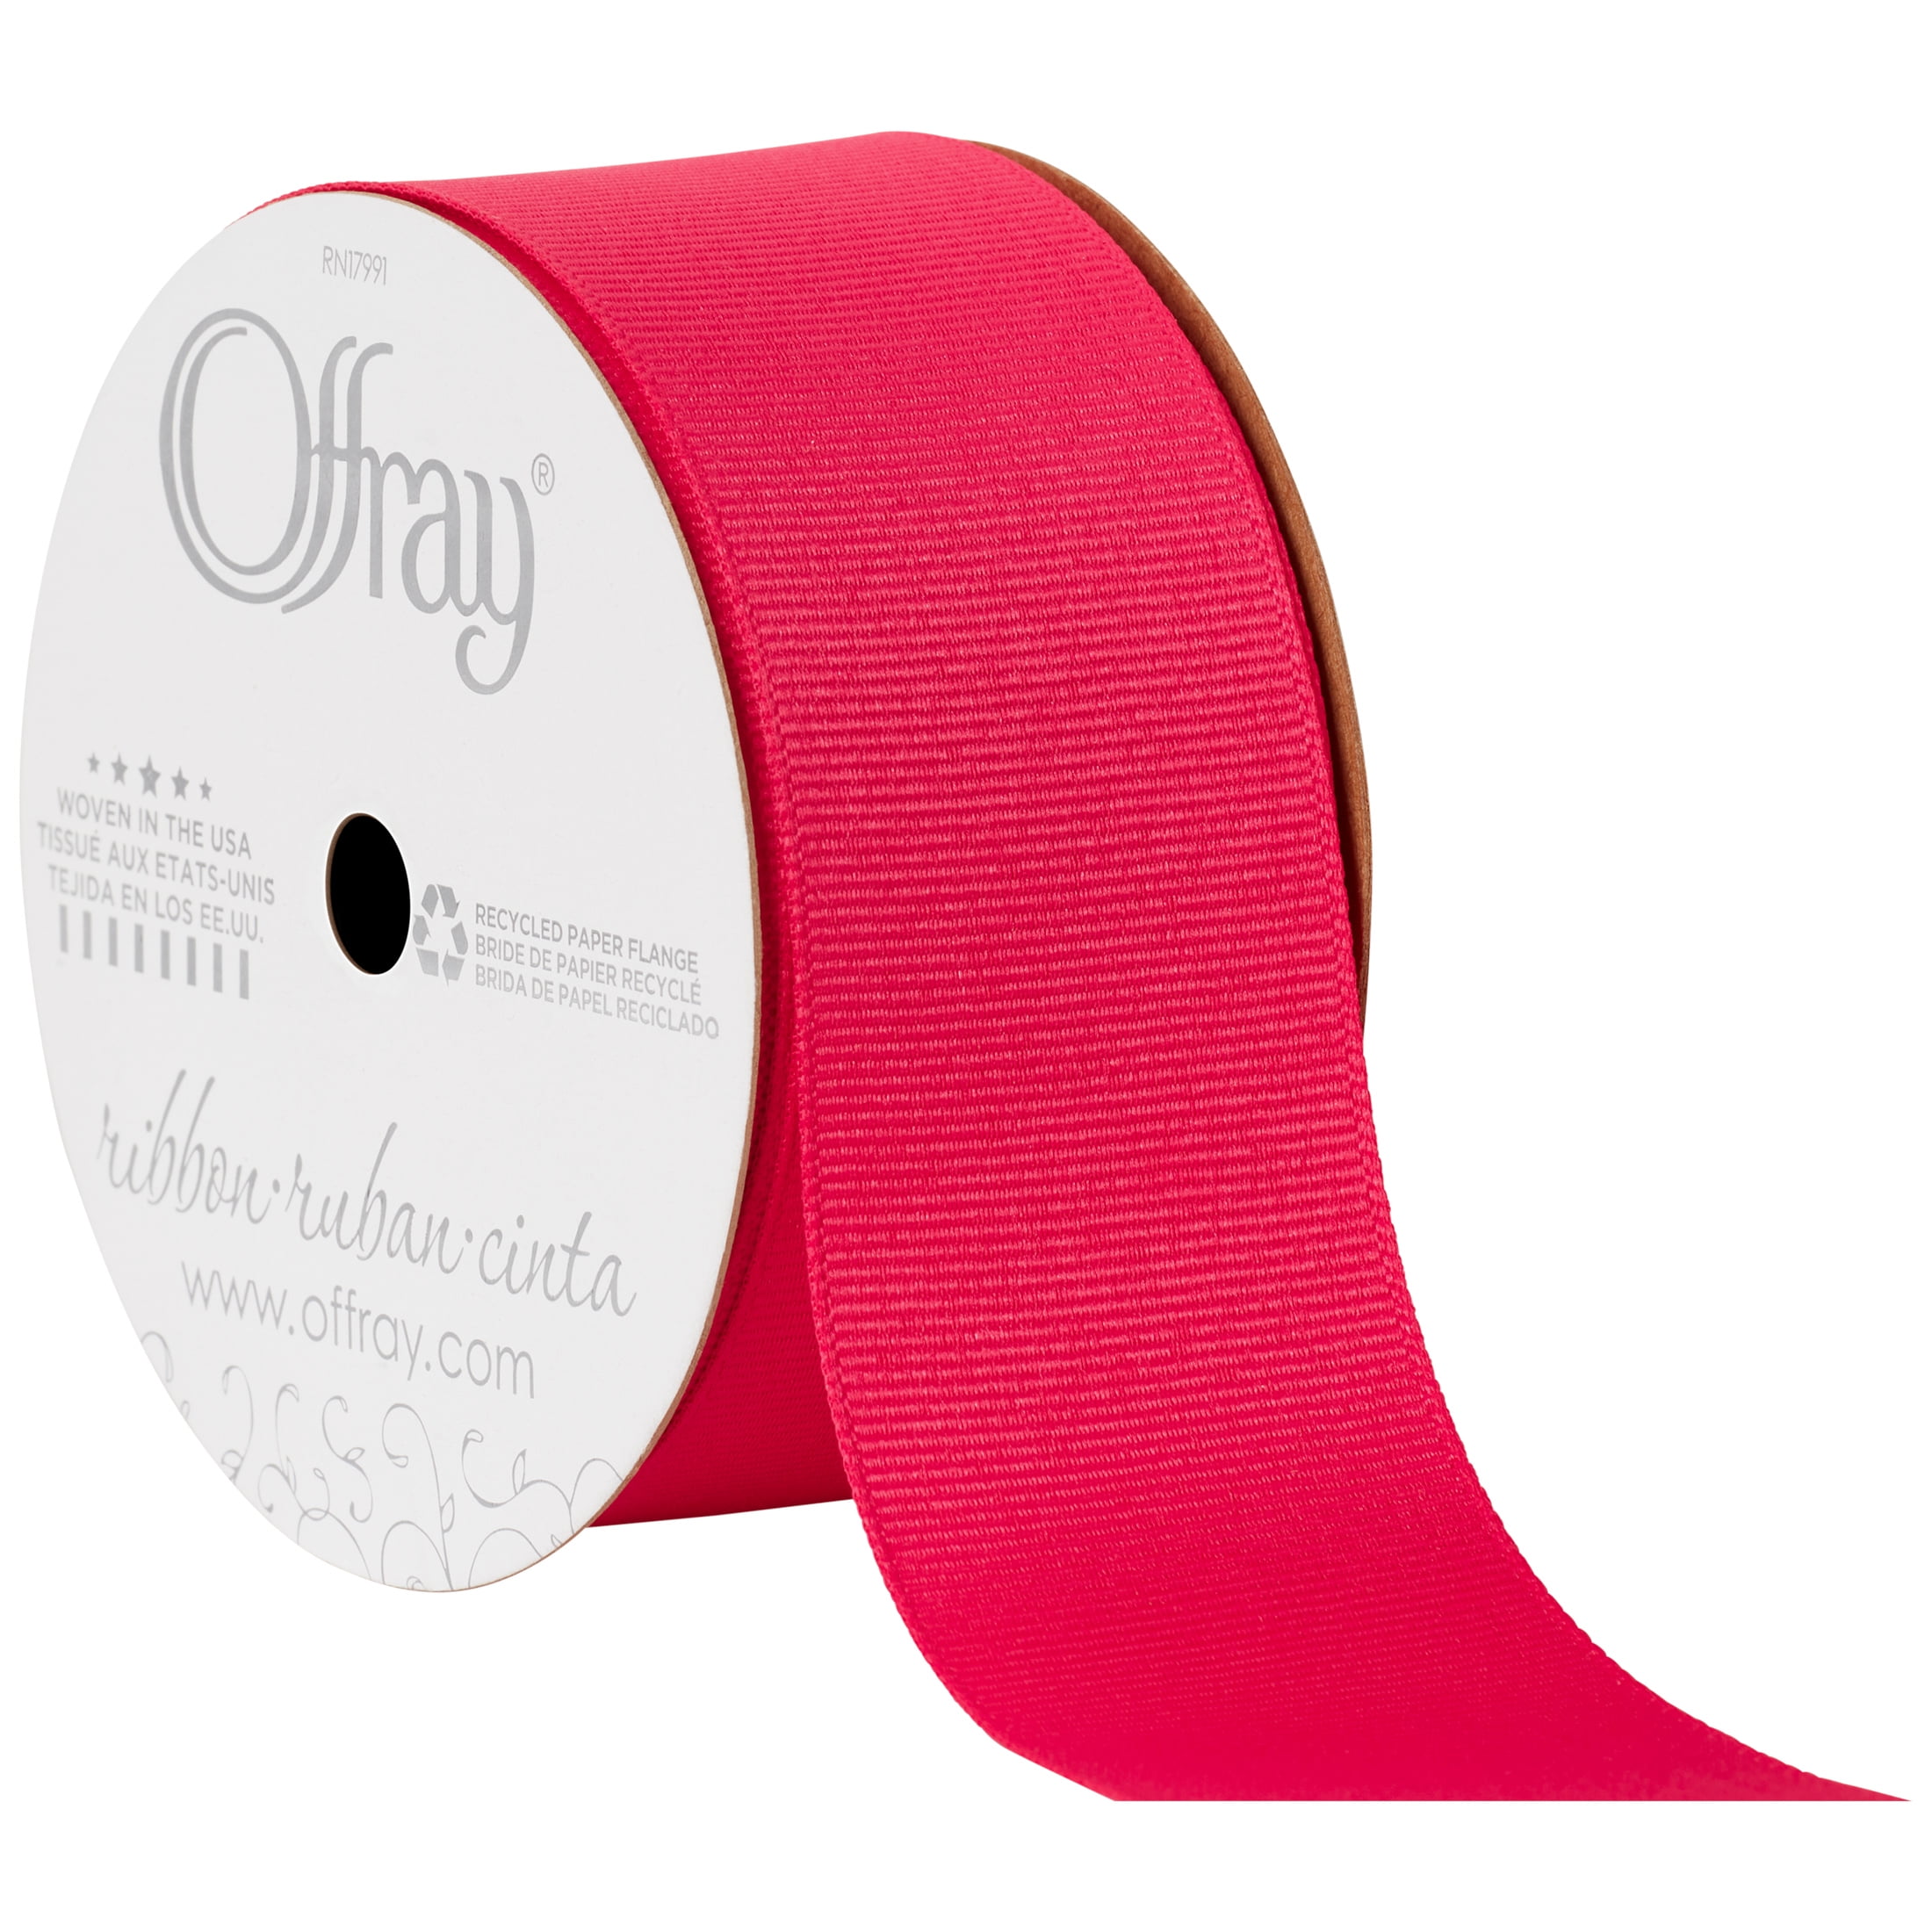 MMIW Ribbon - Width 1 1/2 inches - Sold by the Yard (36 inches